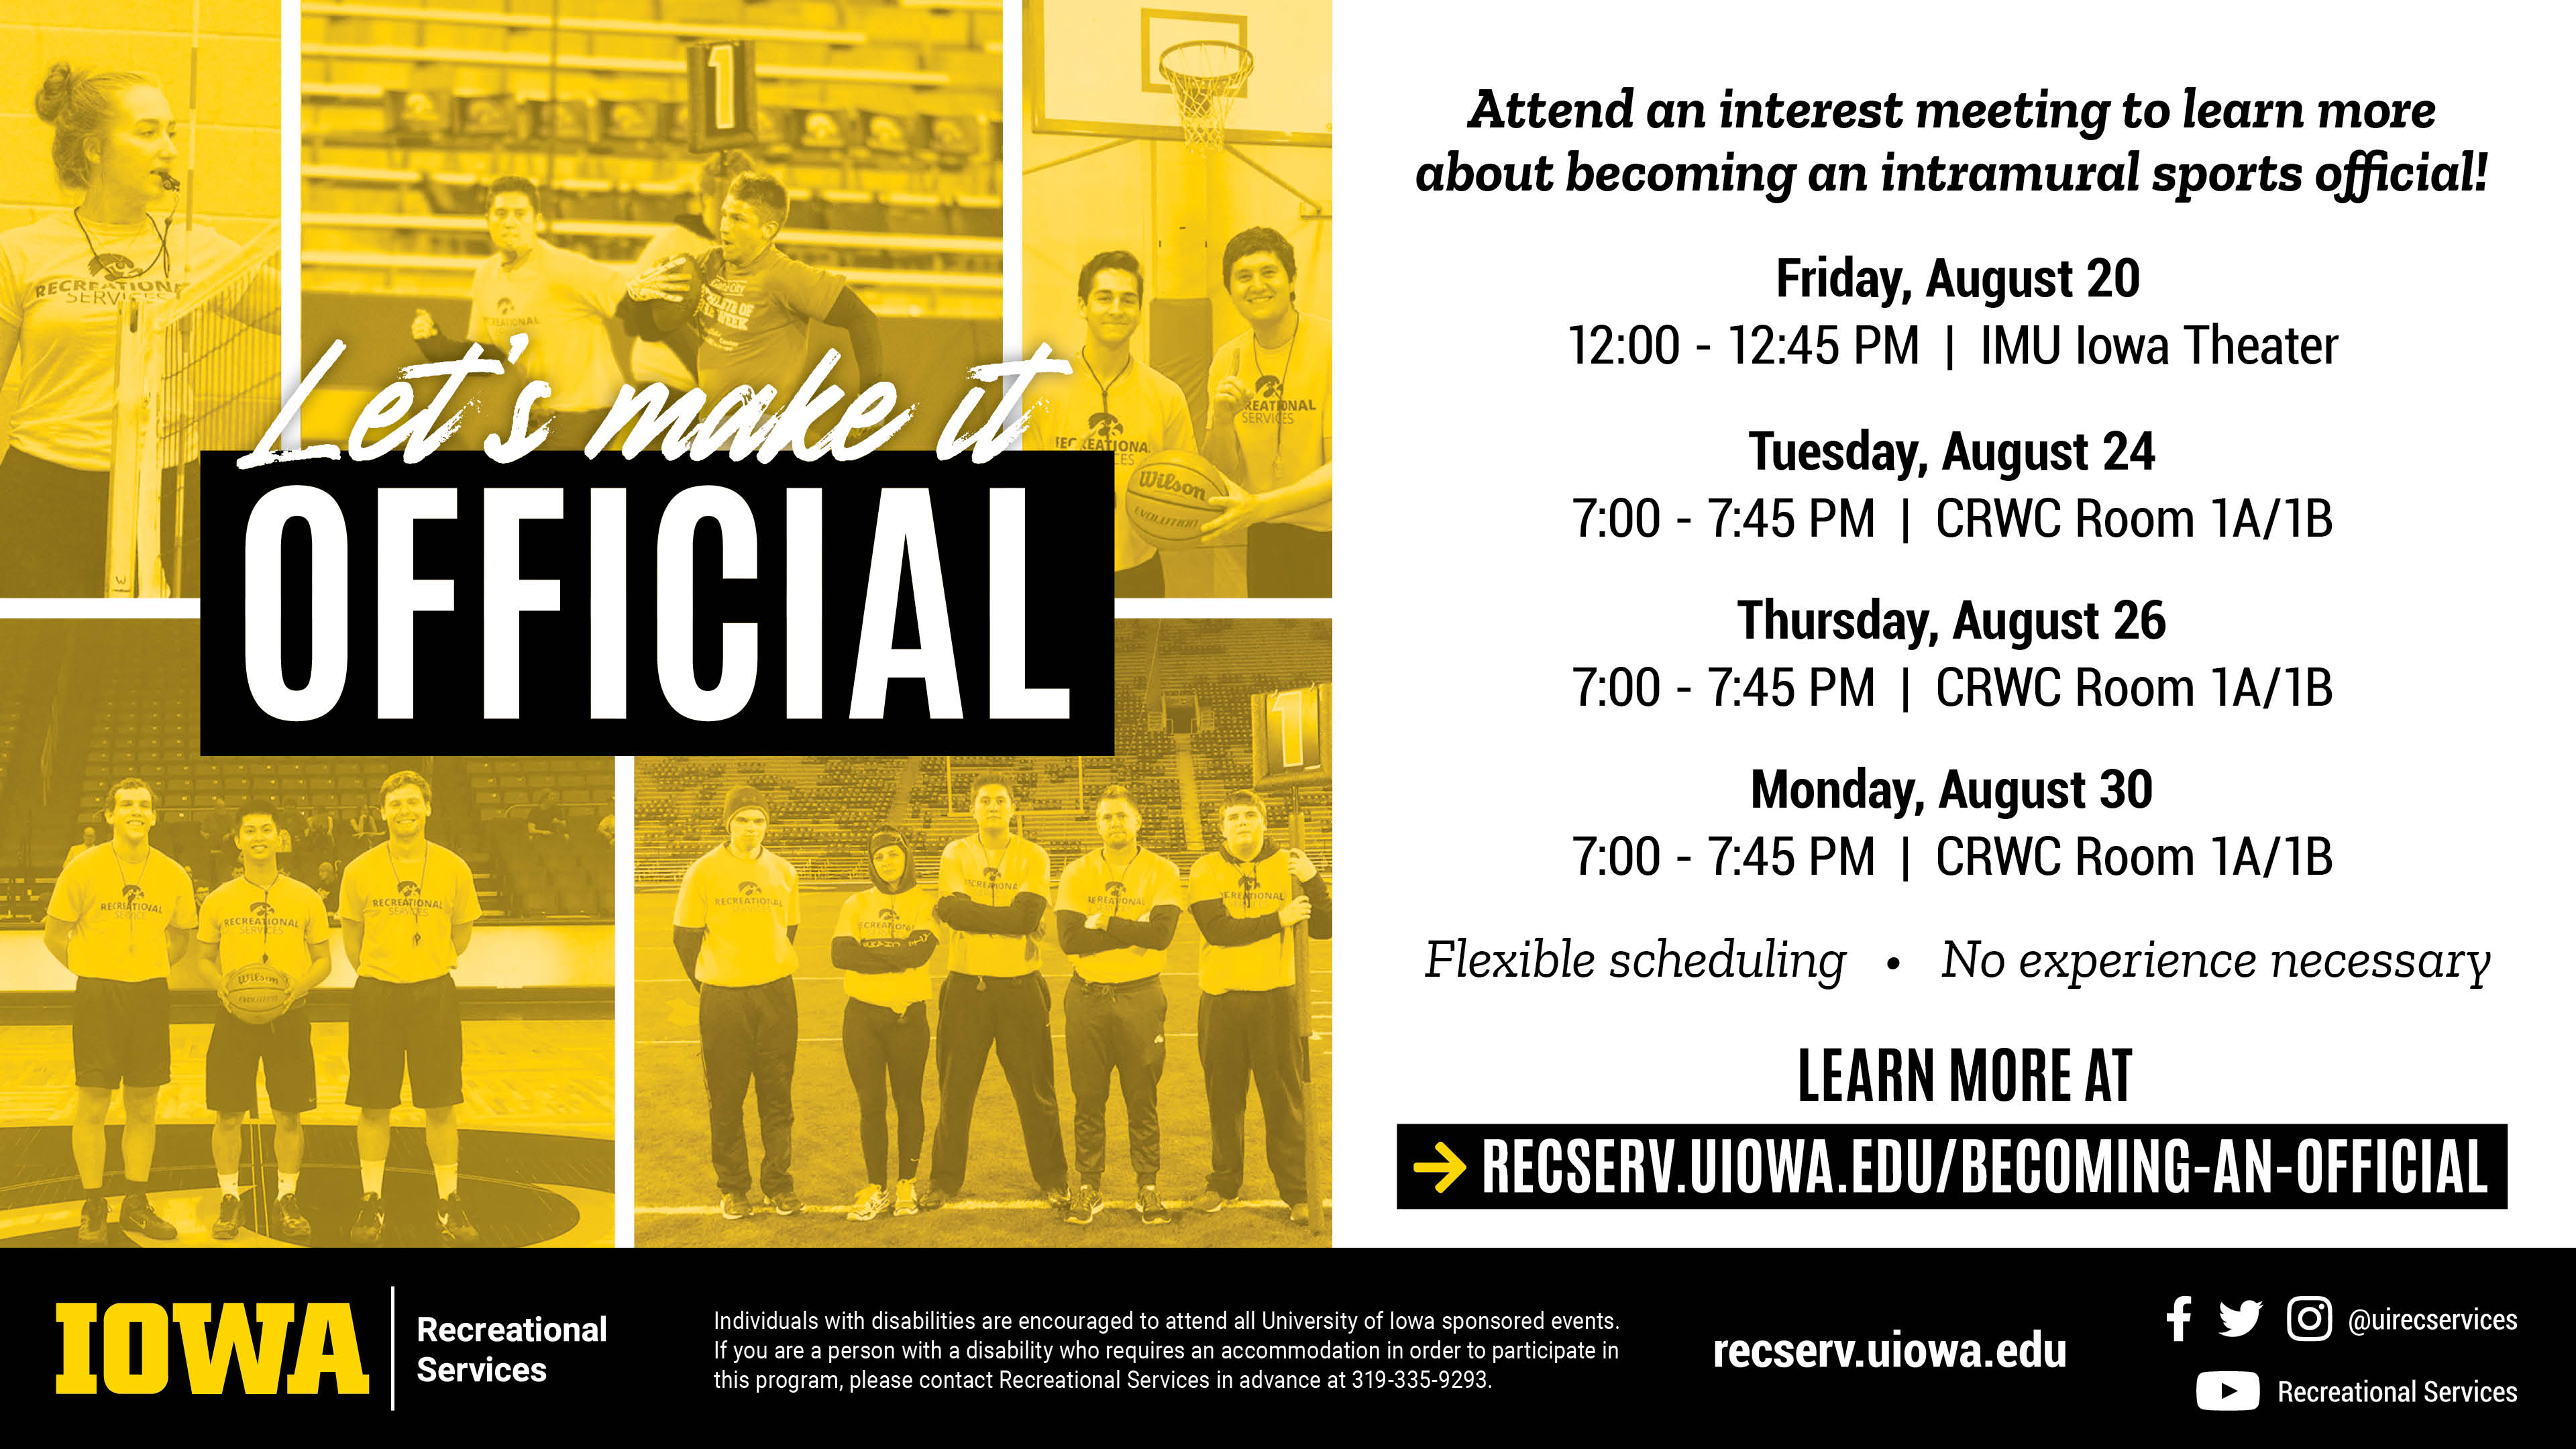 Let's make it official. Attend an interest meeting to learn more about becoming an intramural sports official! Tuesday, August 24 | 7:00-7:45 pm. | CRWC Room 1A/1B; Thursday, August 26 | 7:00-7:45 pm. | CRWC Room 1A/1B; Monday, August 30 | 7:00-7:45 pm. | CRWC Room 1A/1B; Learn more at recserv.uiowa.edu/becoming-an-official